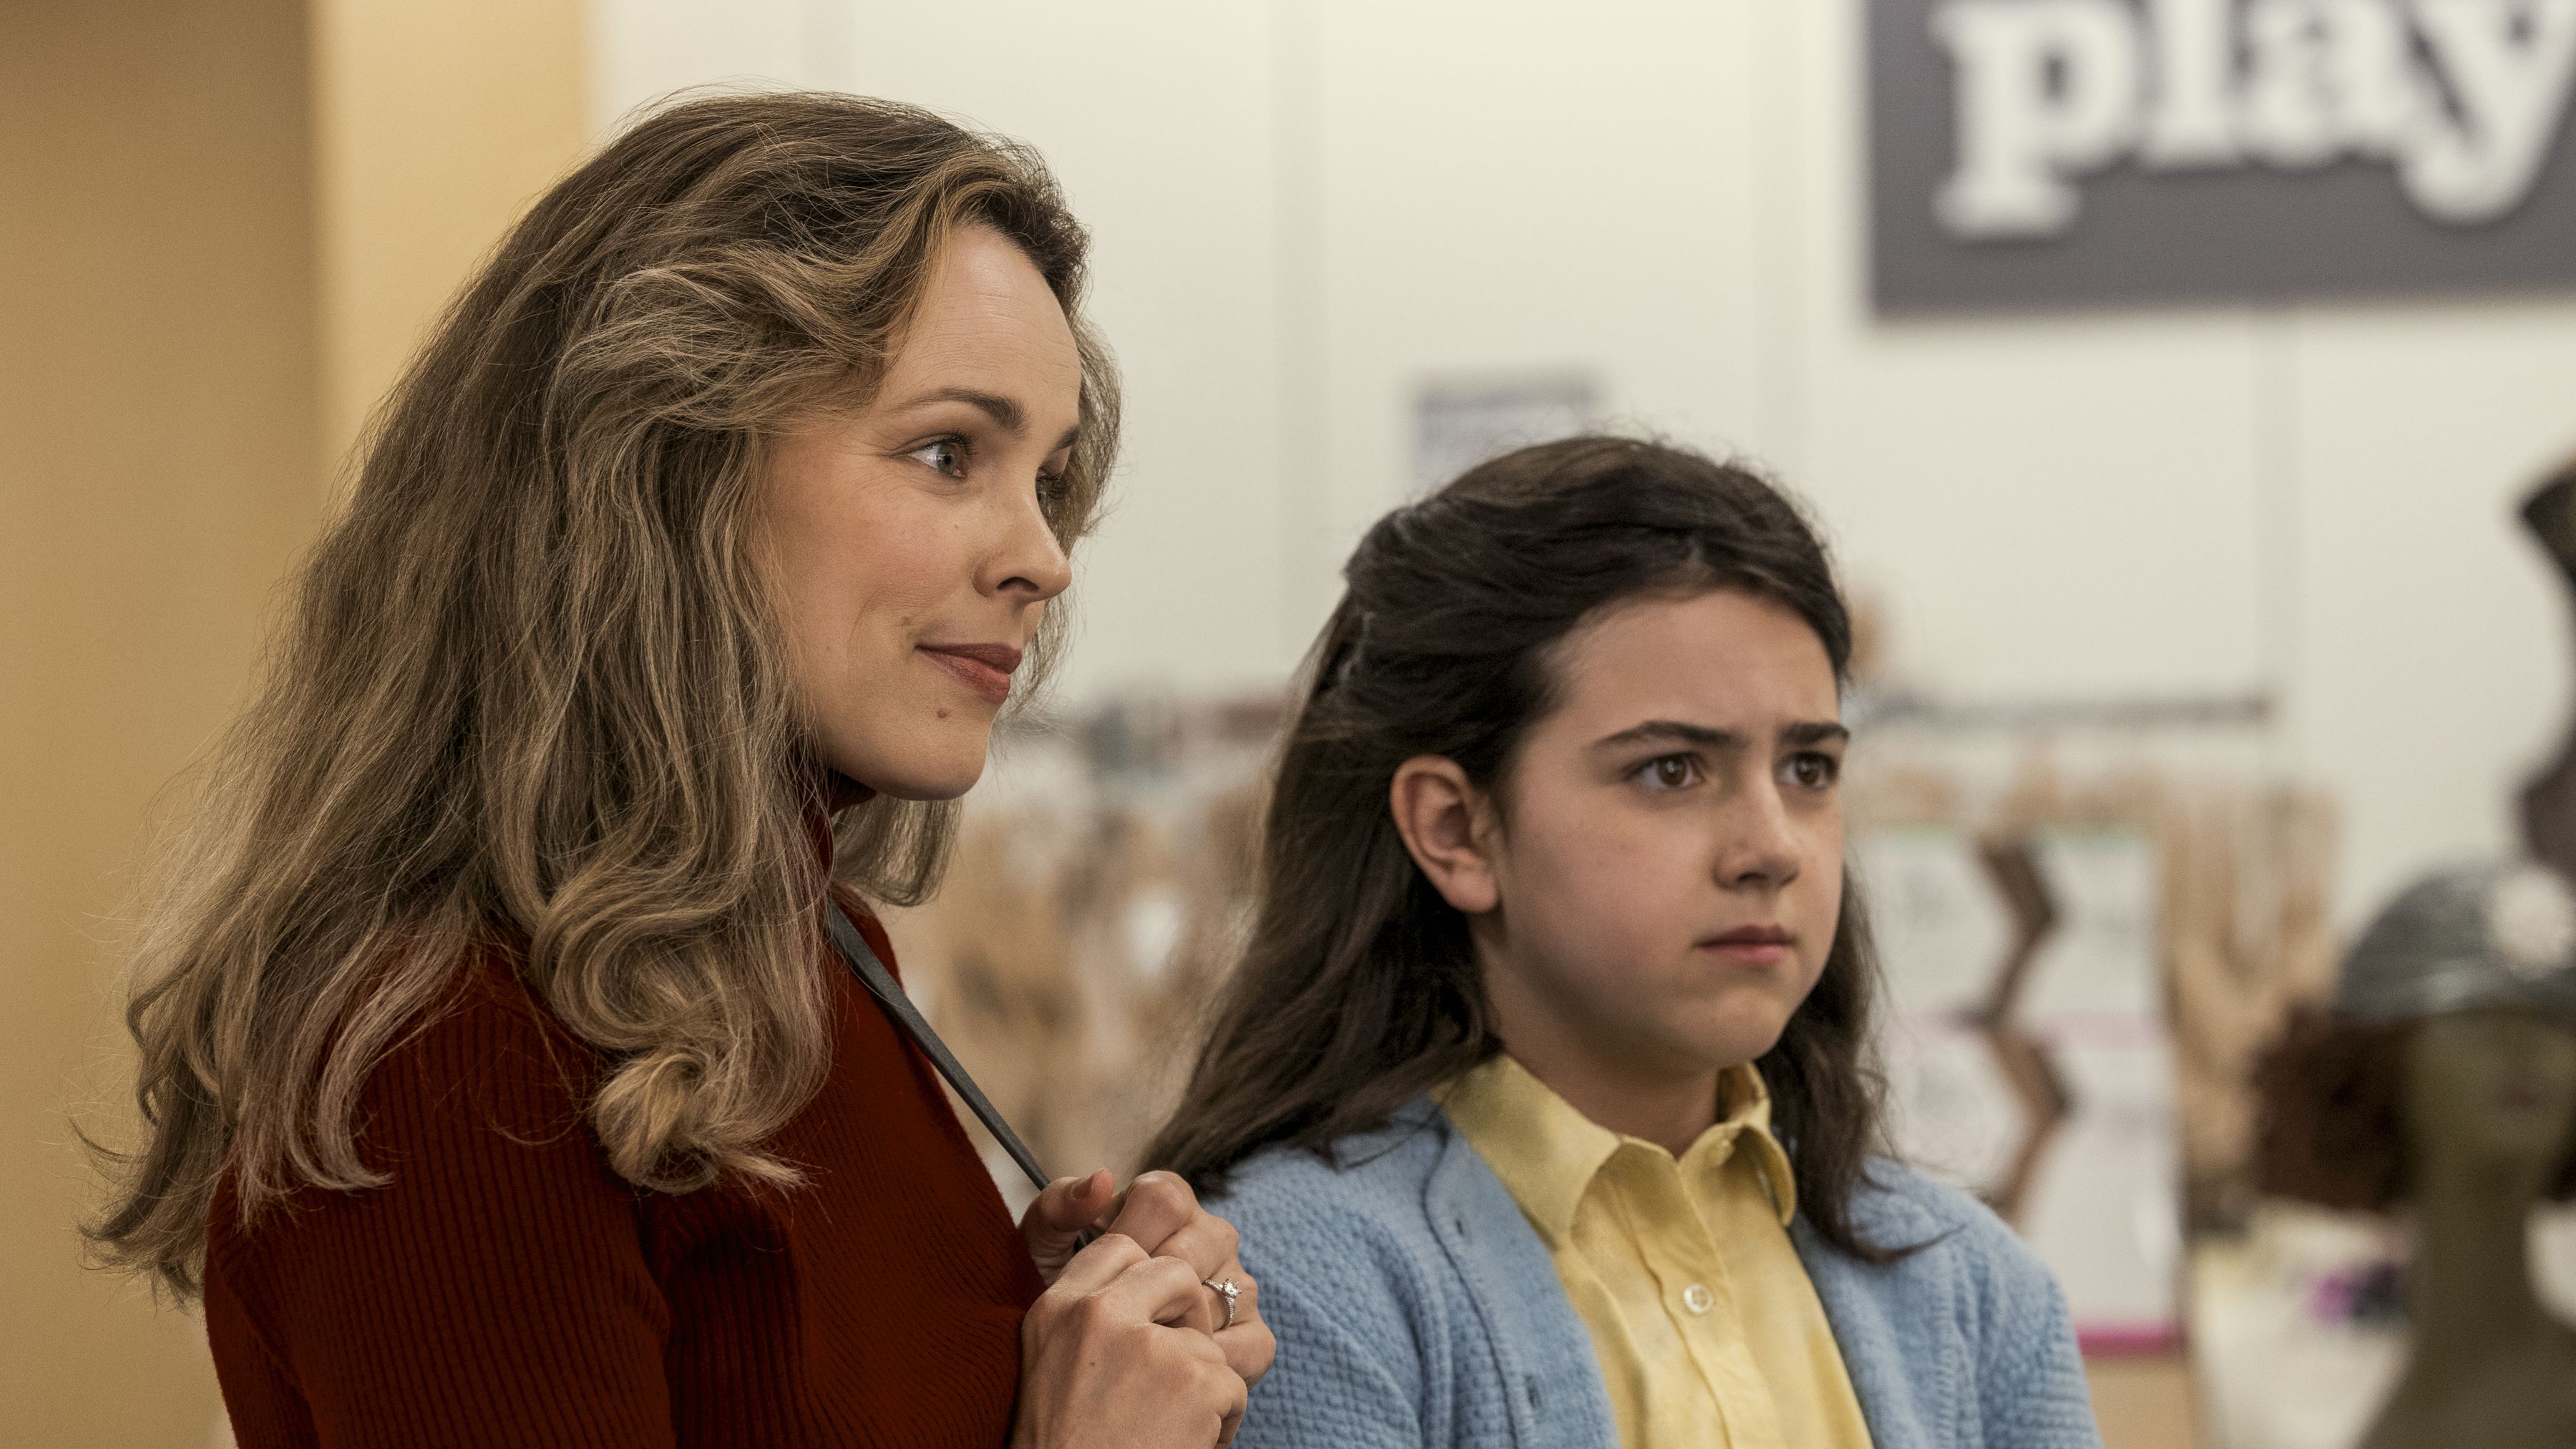 Are You There God? It's Me, Margaret Movie News, Premiere Date, Casting